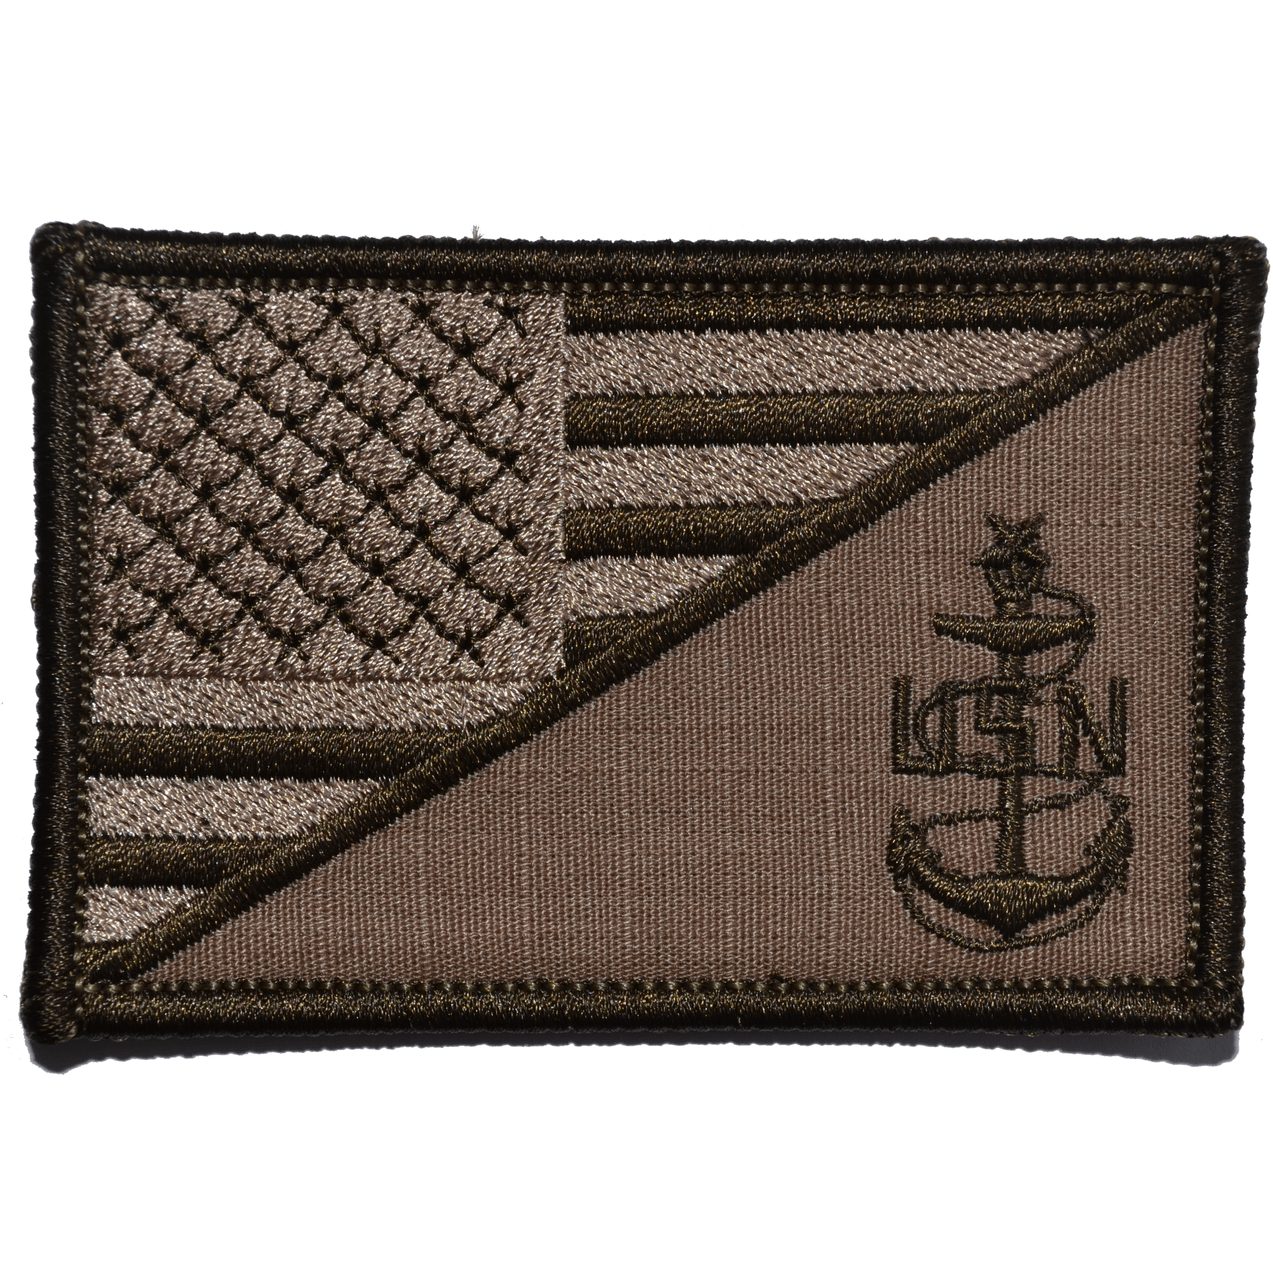 Tactical Gear Junkie Patches Coyote Brown Navy SCPO Senior Chief Petty Officer USA Flag - 2.25x3.5 Patch